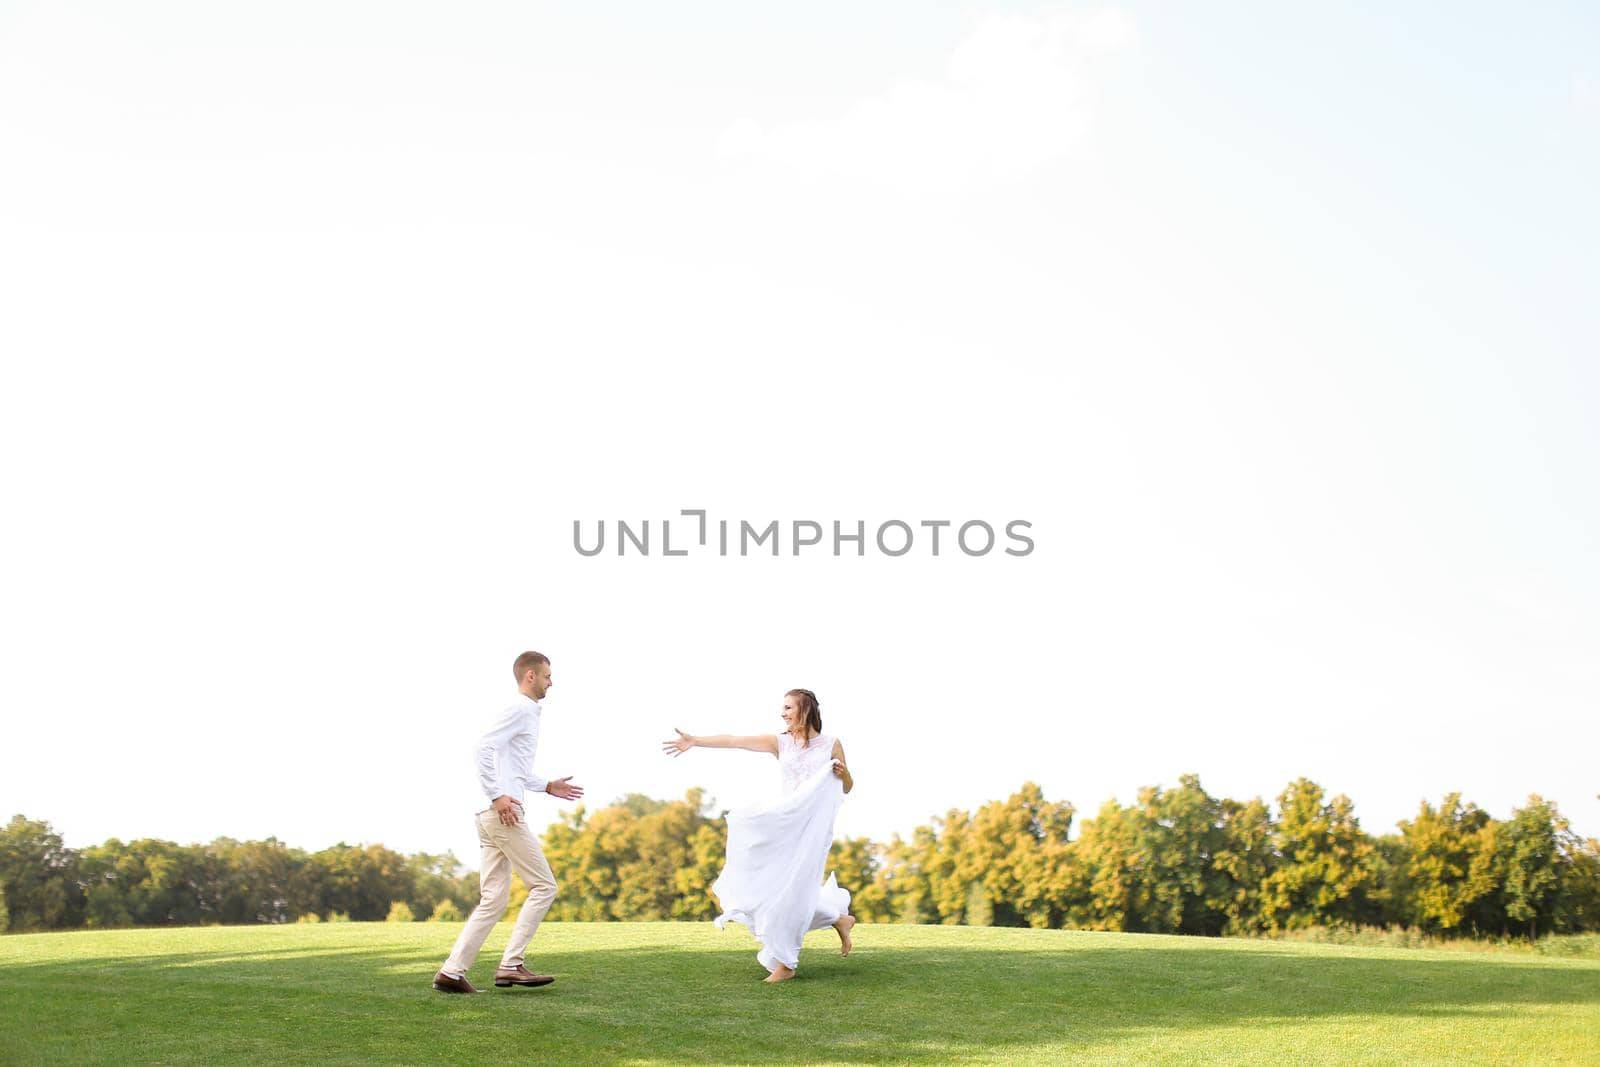 Groom and happy bride running and playing on grass. Concept of wedding photo session on open air and nature.